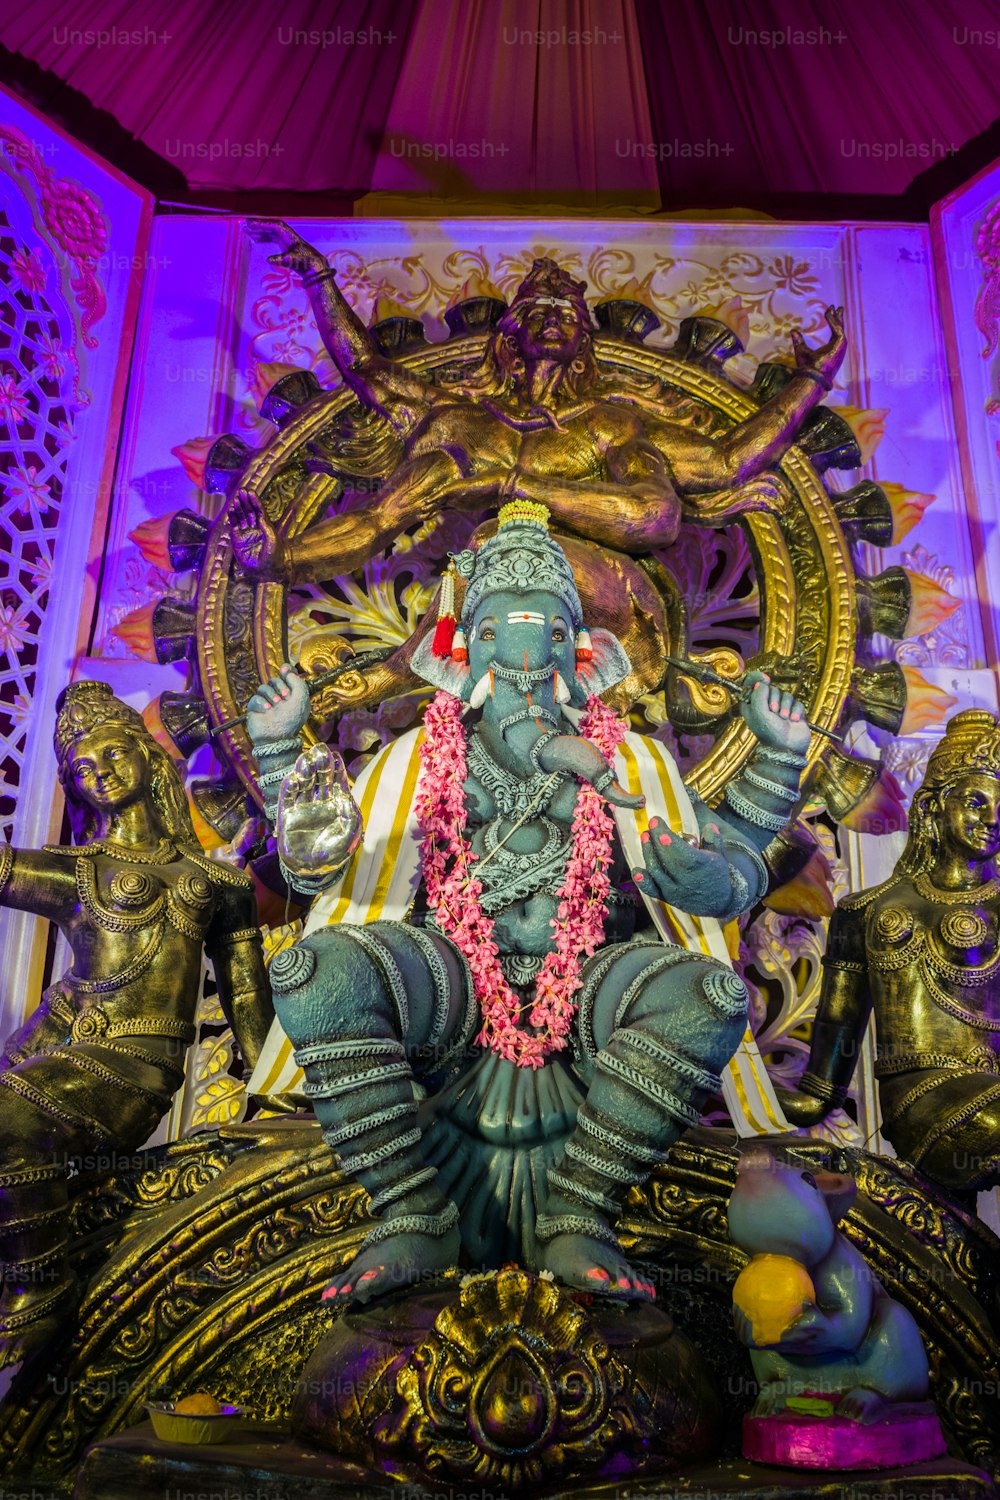 a statue of the god ganesh in a temple